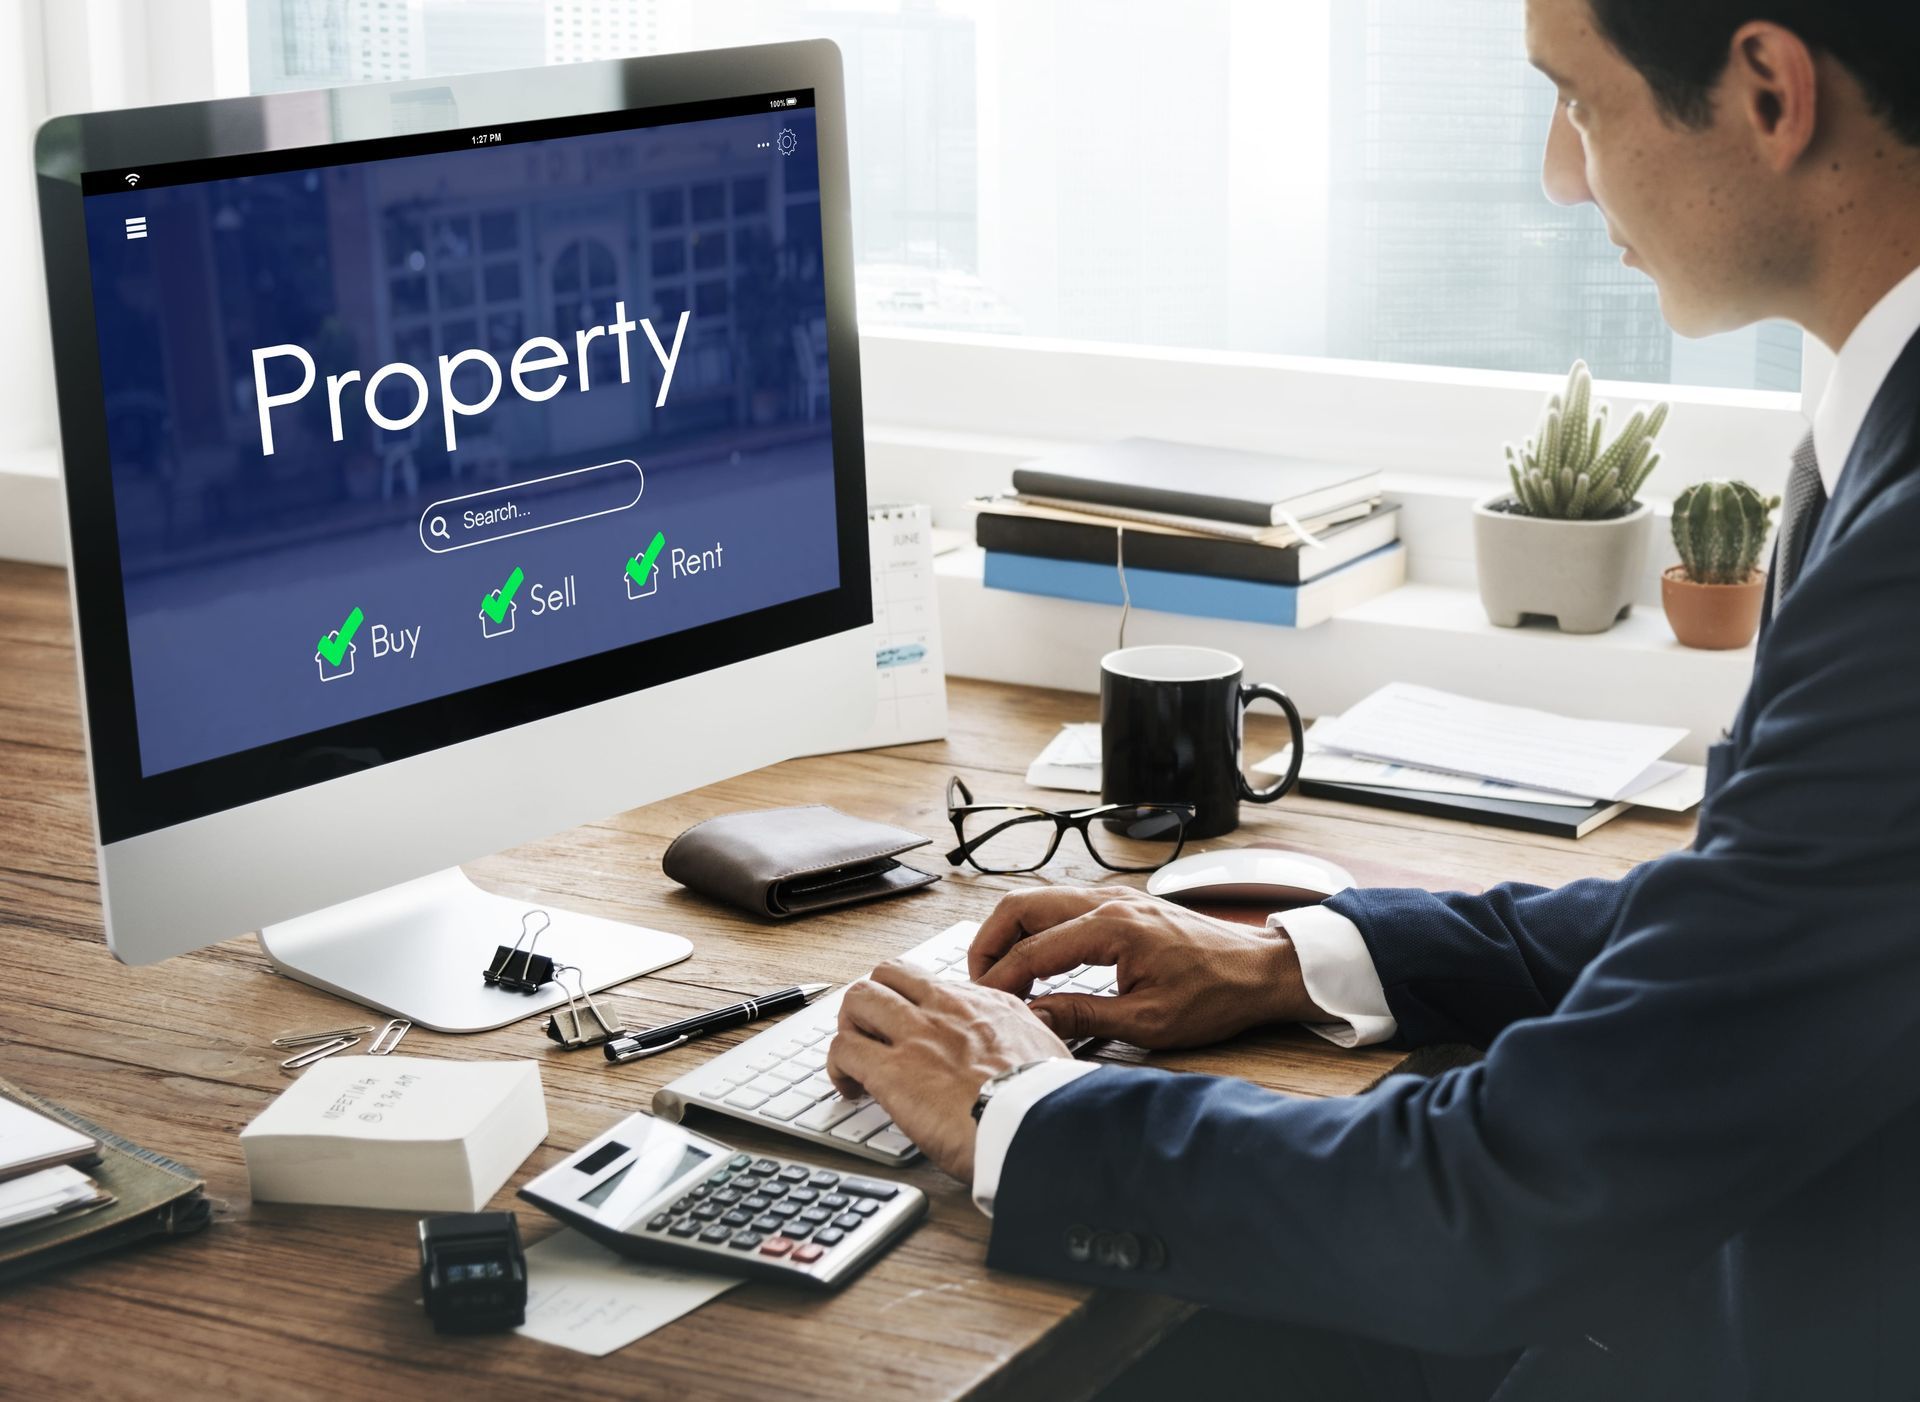 Technology in Property Management